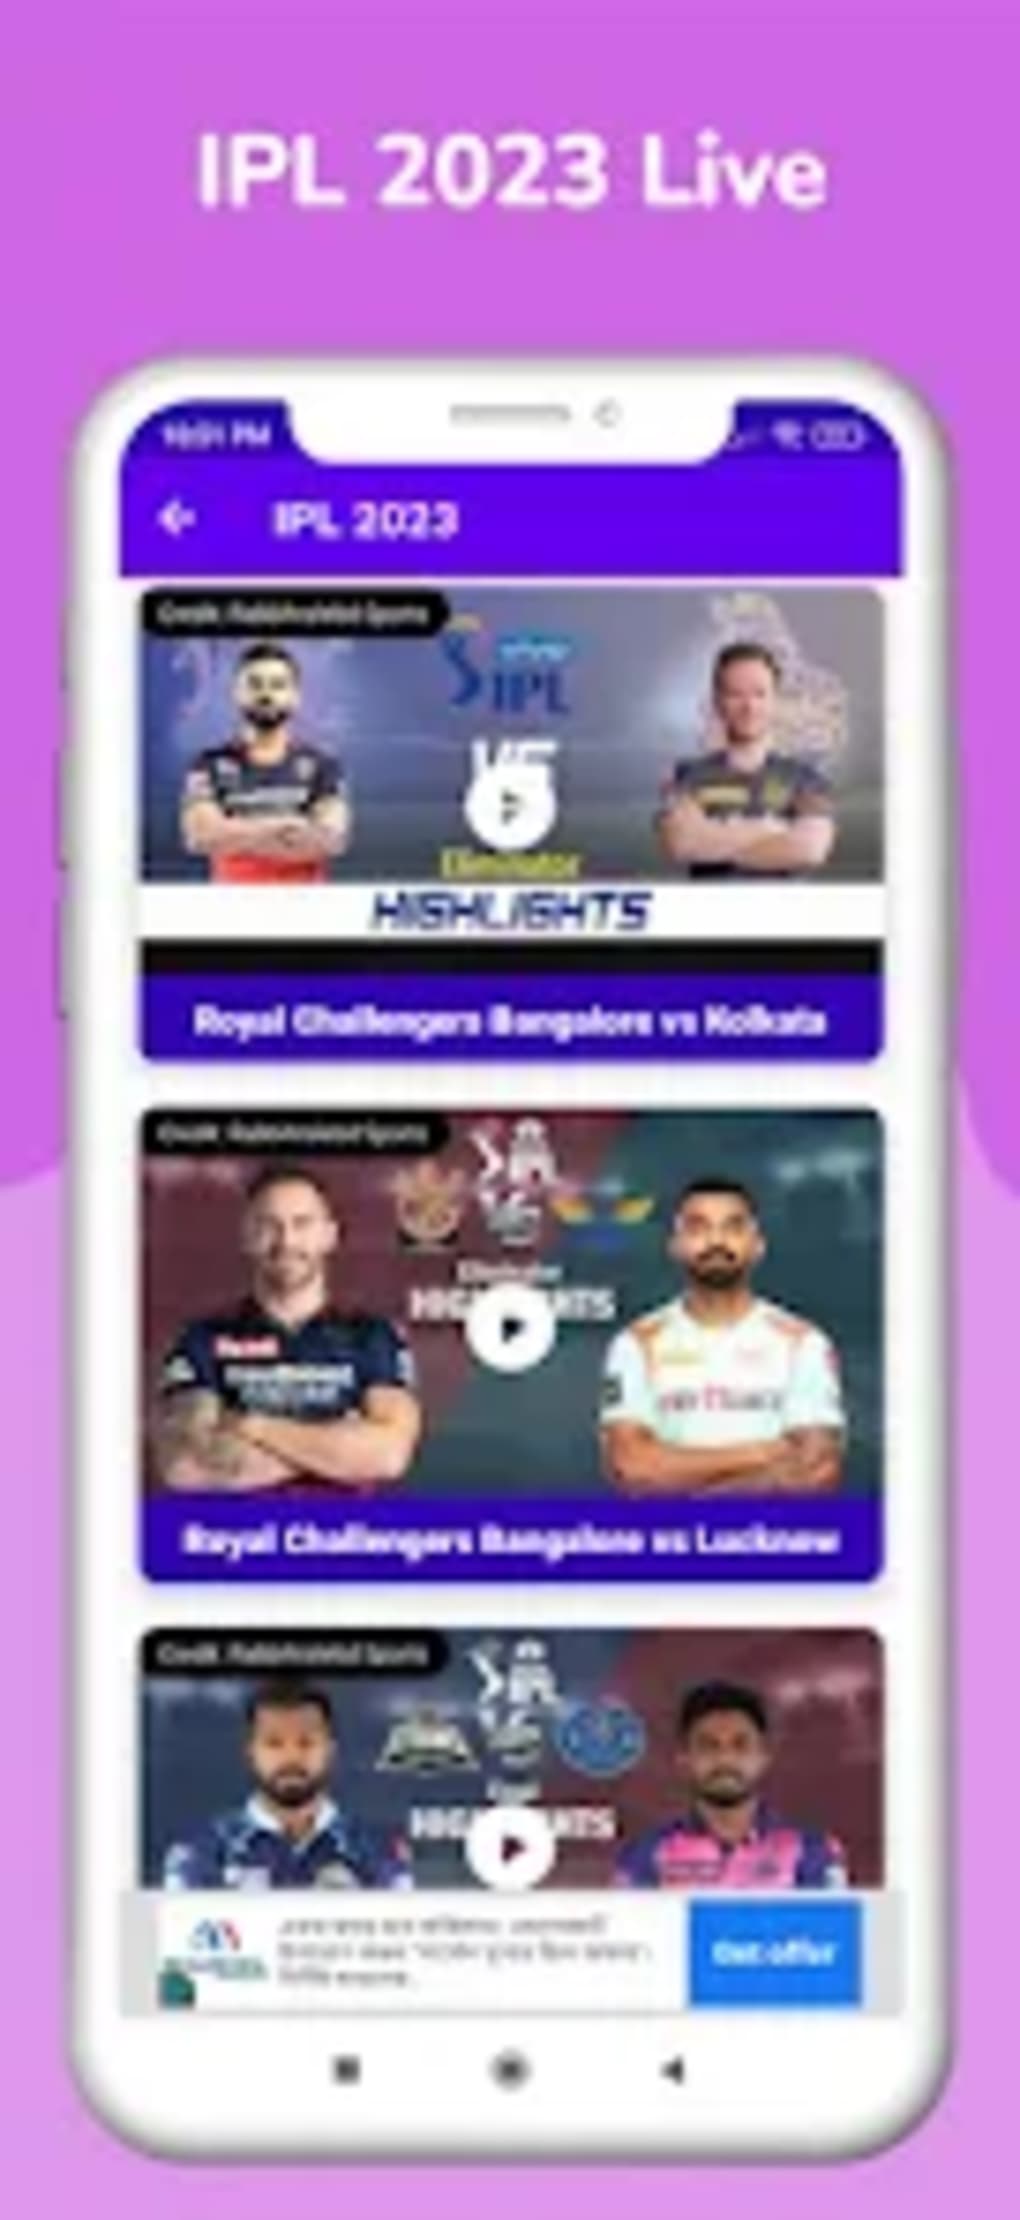 Ipl 2023 Schedule Live Score For Android Download